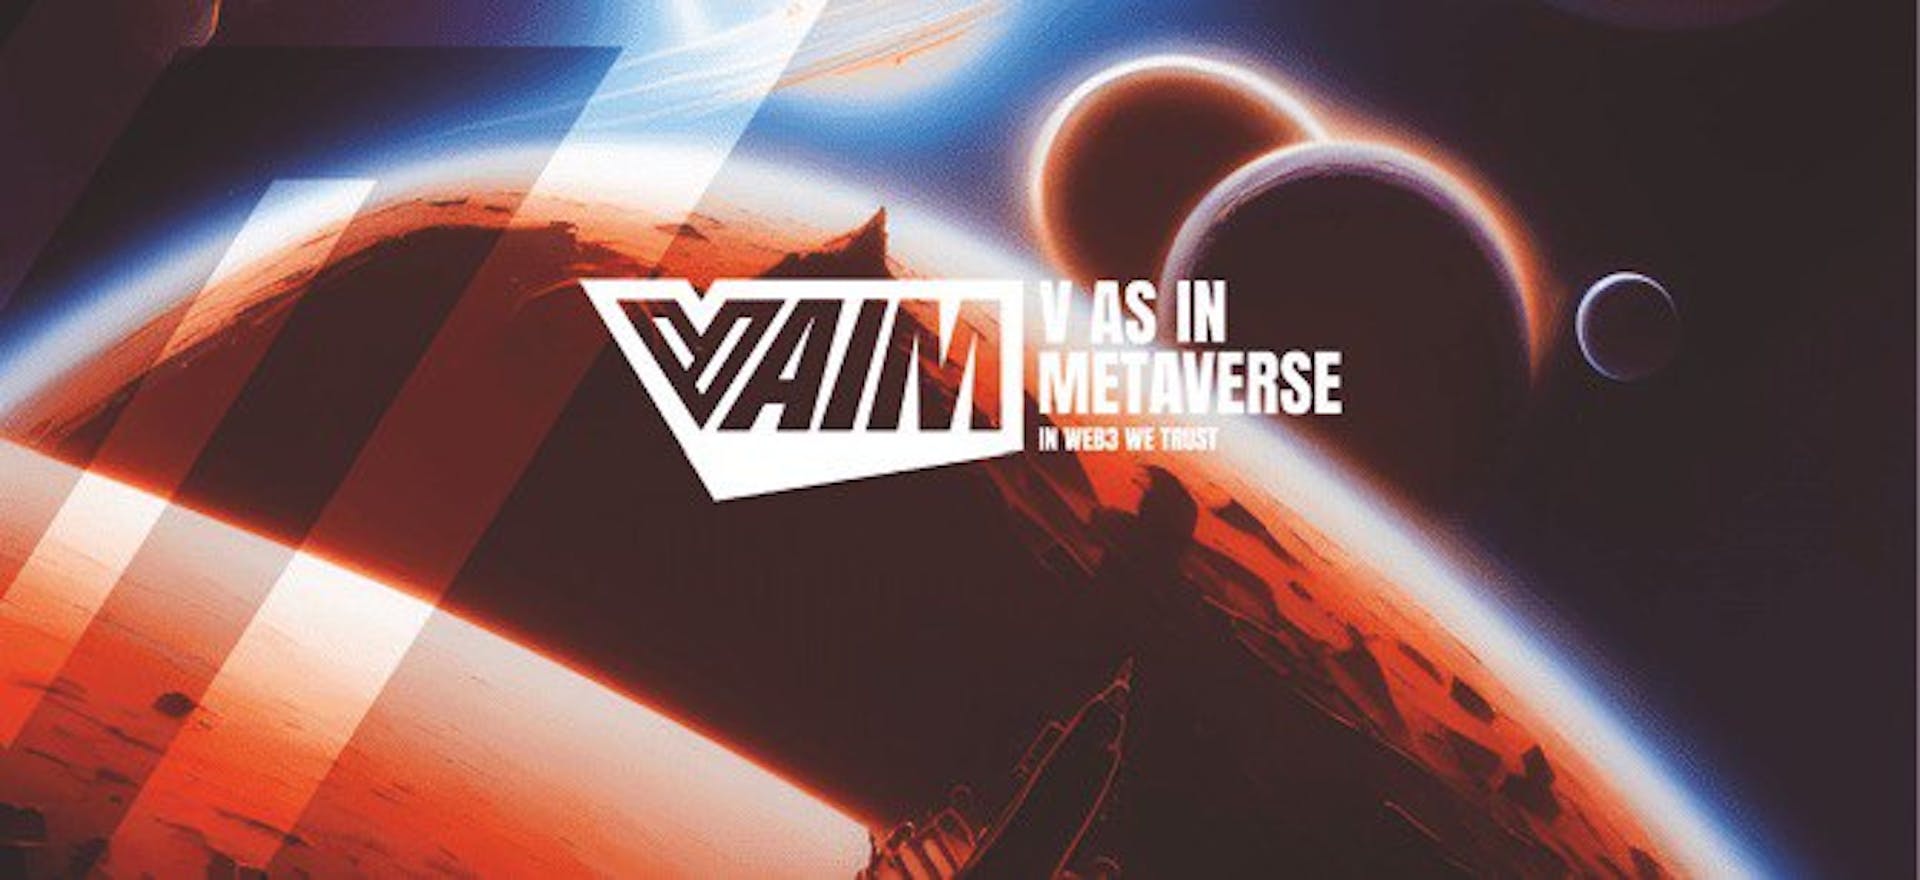 V as in MetaVerse Flyer